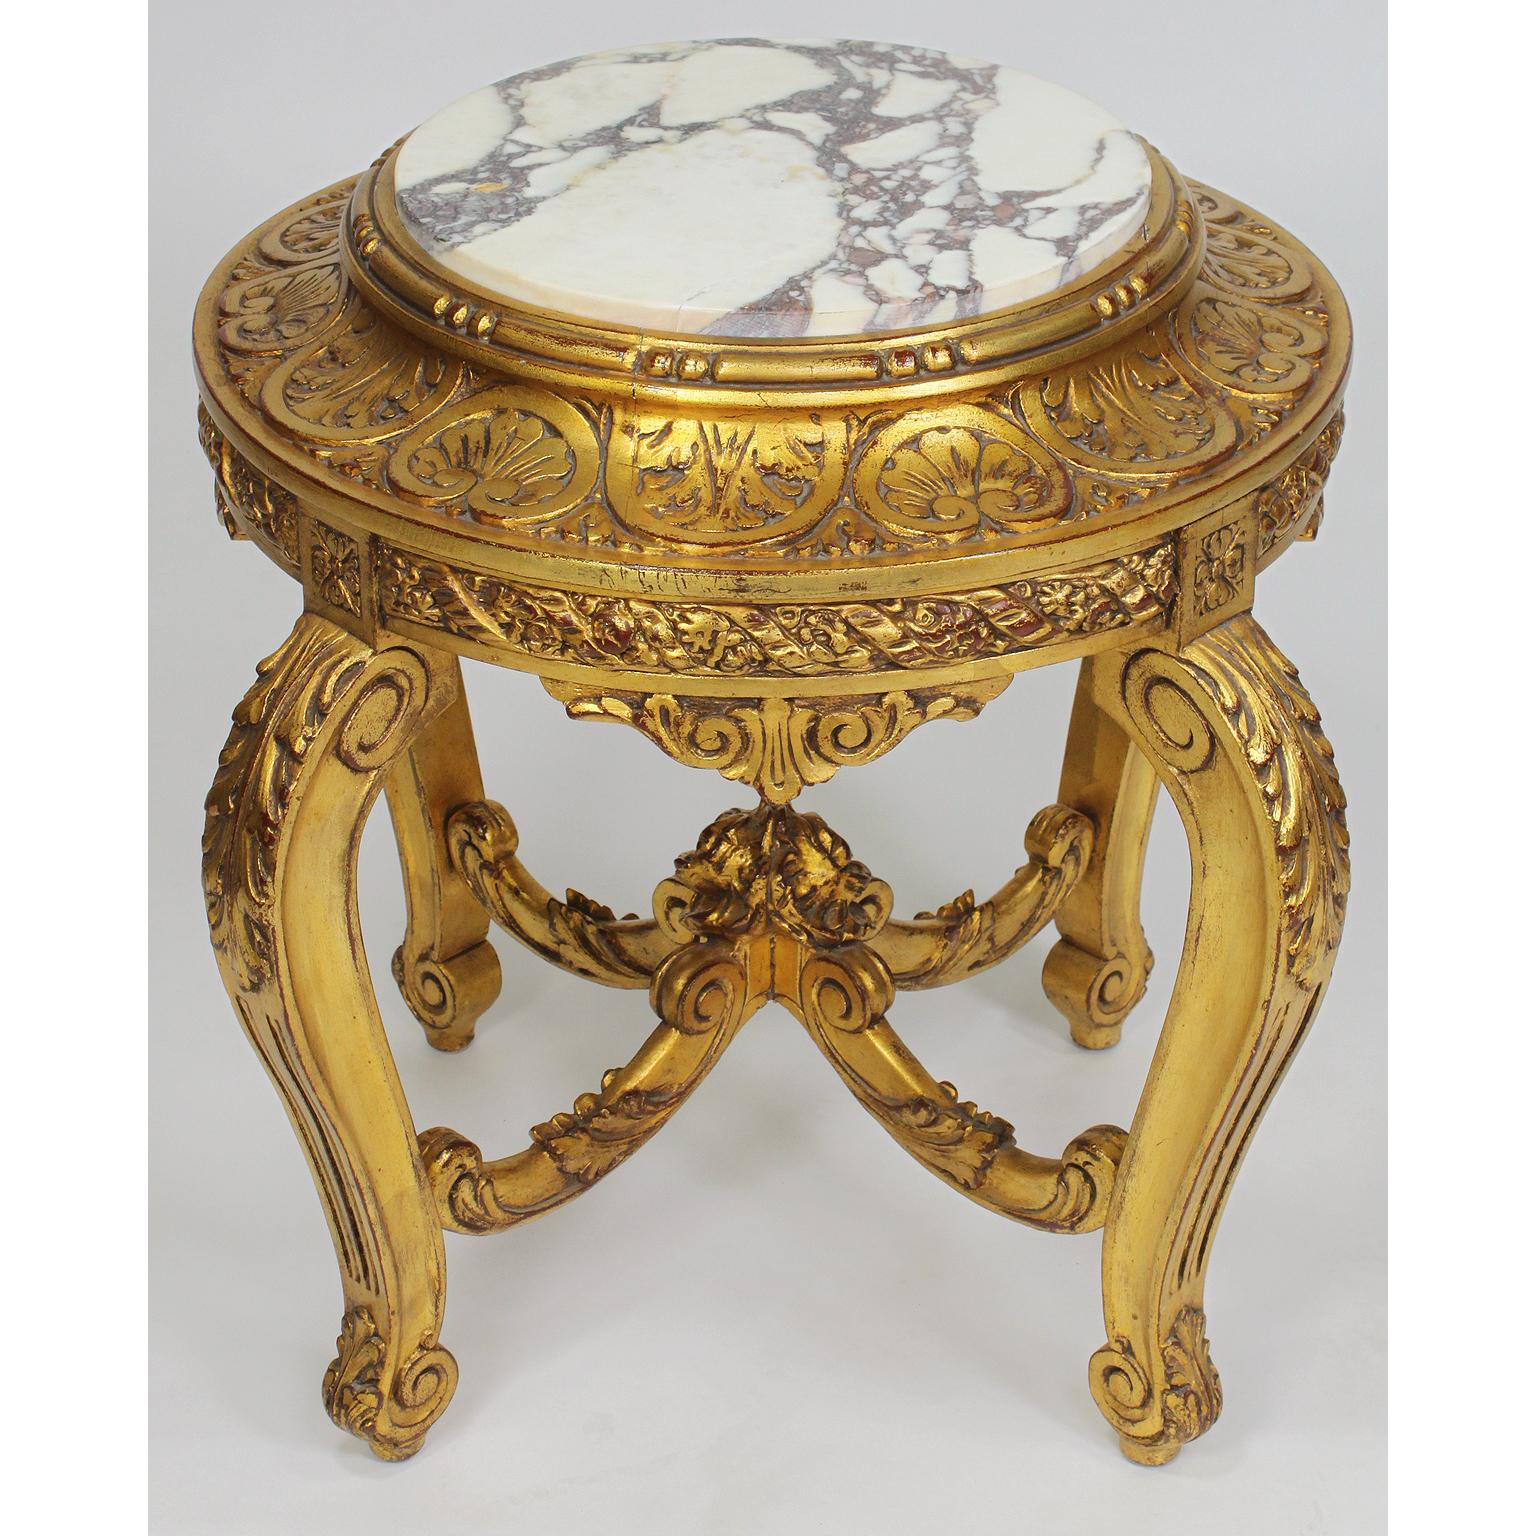 A French belle époque Louis XV style giltwood carved pedestal stand with marble top. The circular pedestal with a carved floral apron depicting flowers and fitted with a veined white marble top, raised on four cabriolet legs conjoined with a center